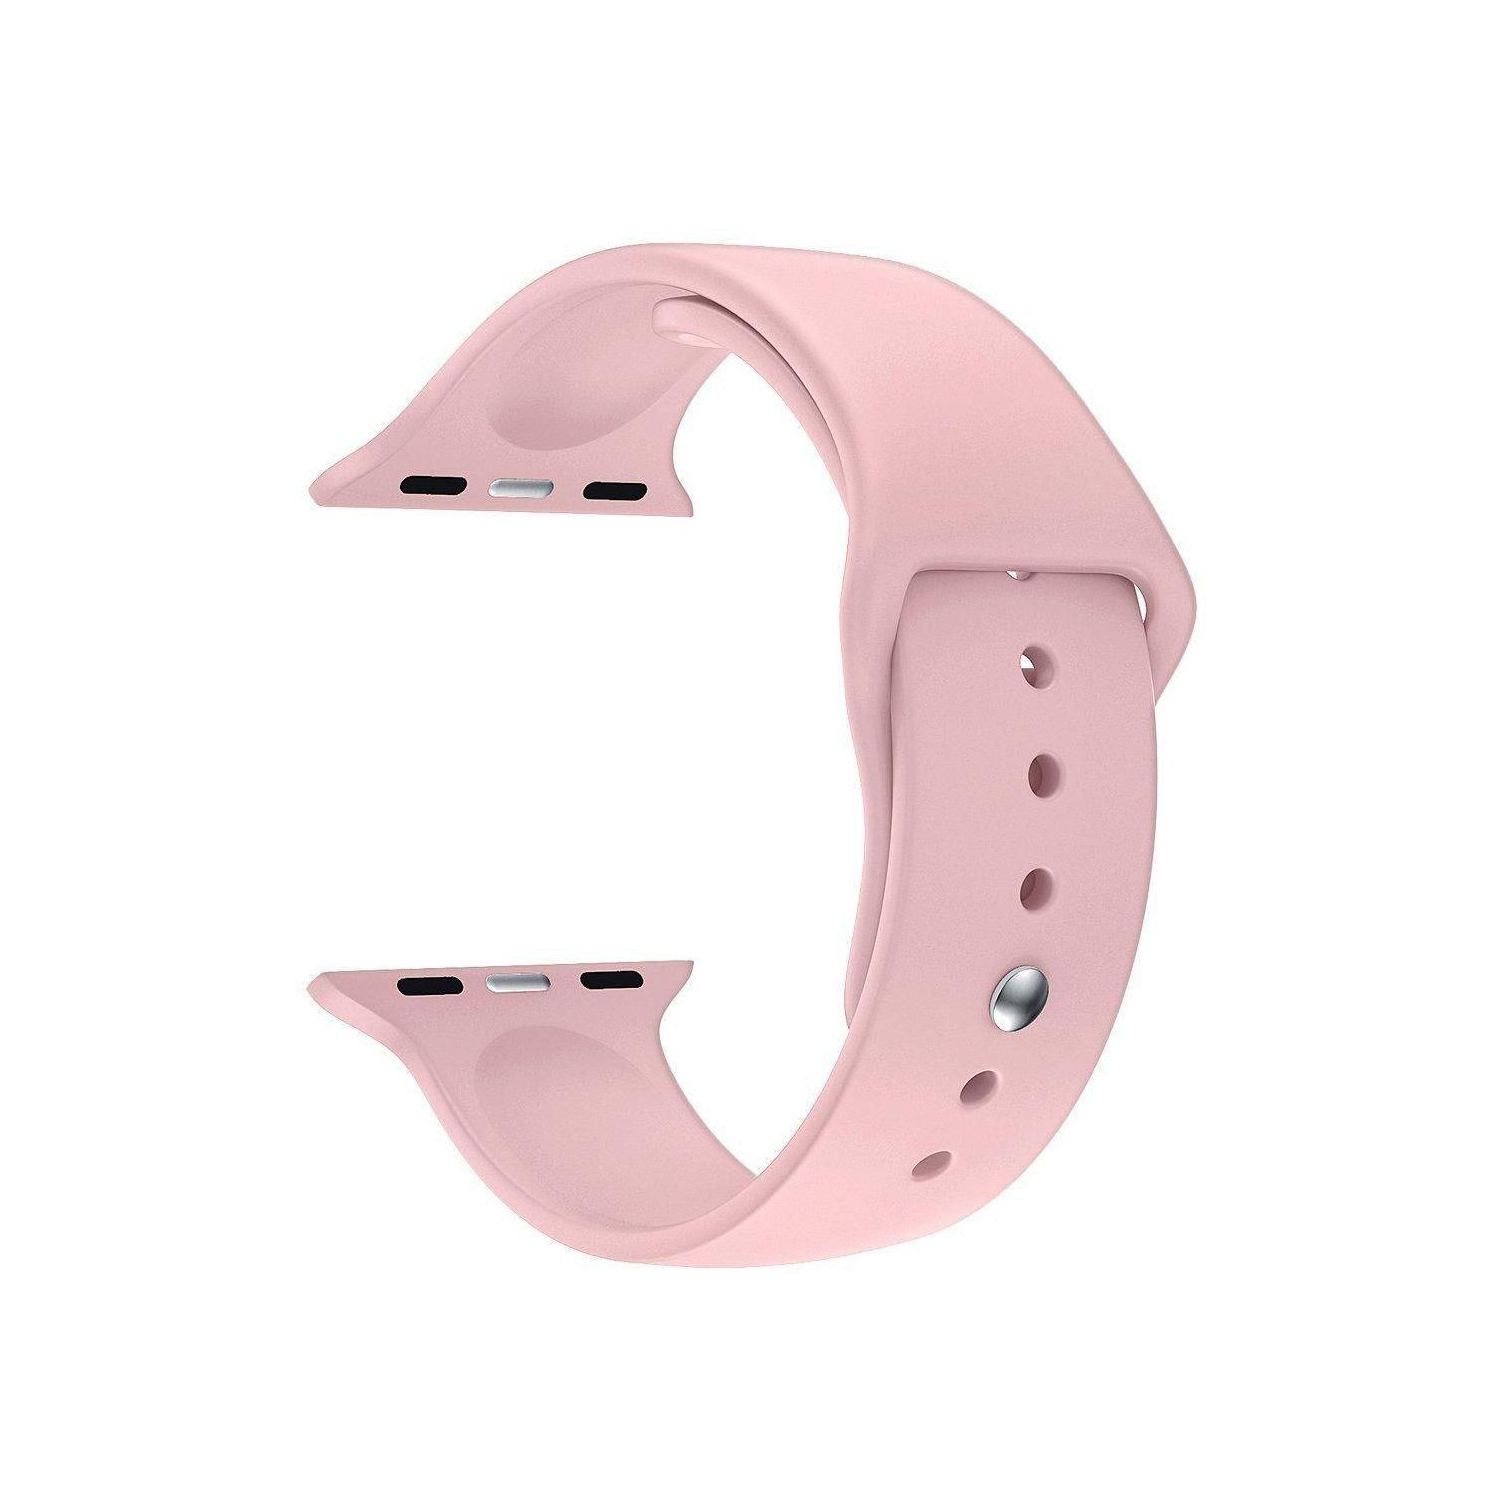 Soft Silicone Replacement Band Strap for Apple Watch iWatch Series 1 to 7 SE, 38mm 40mm 41mm, Rose Gold